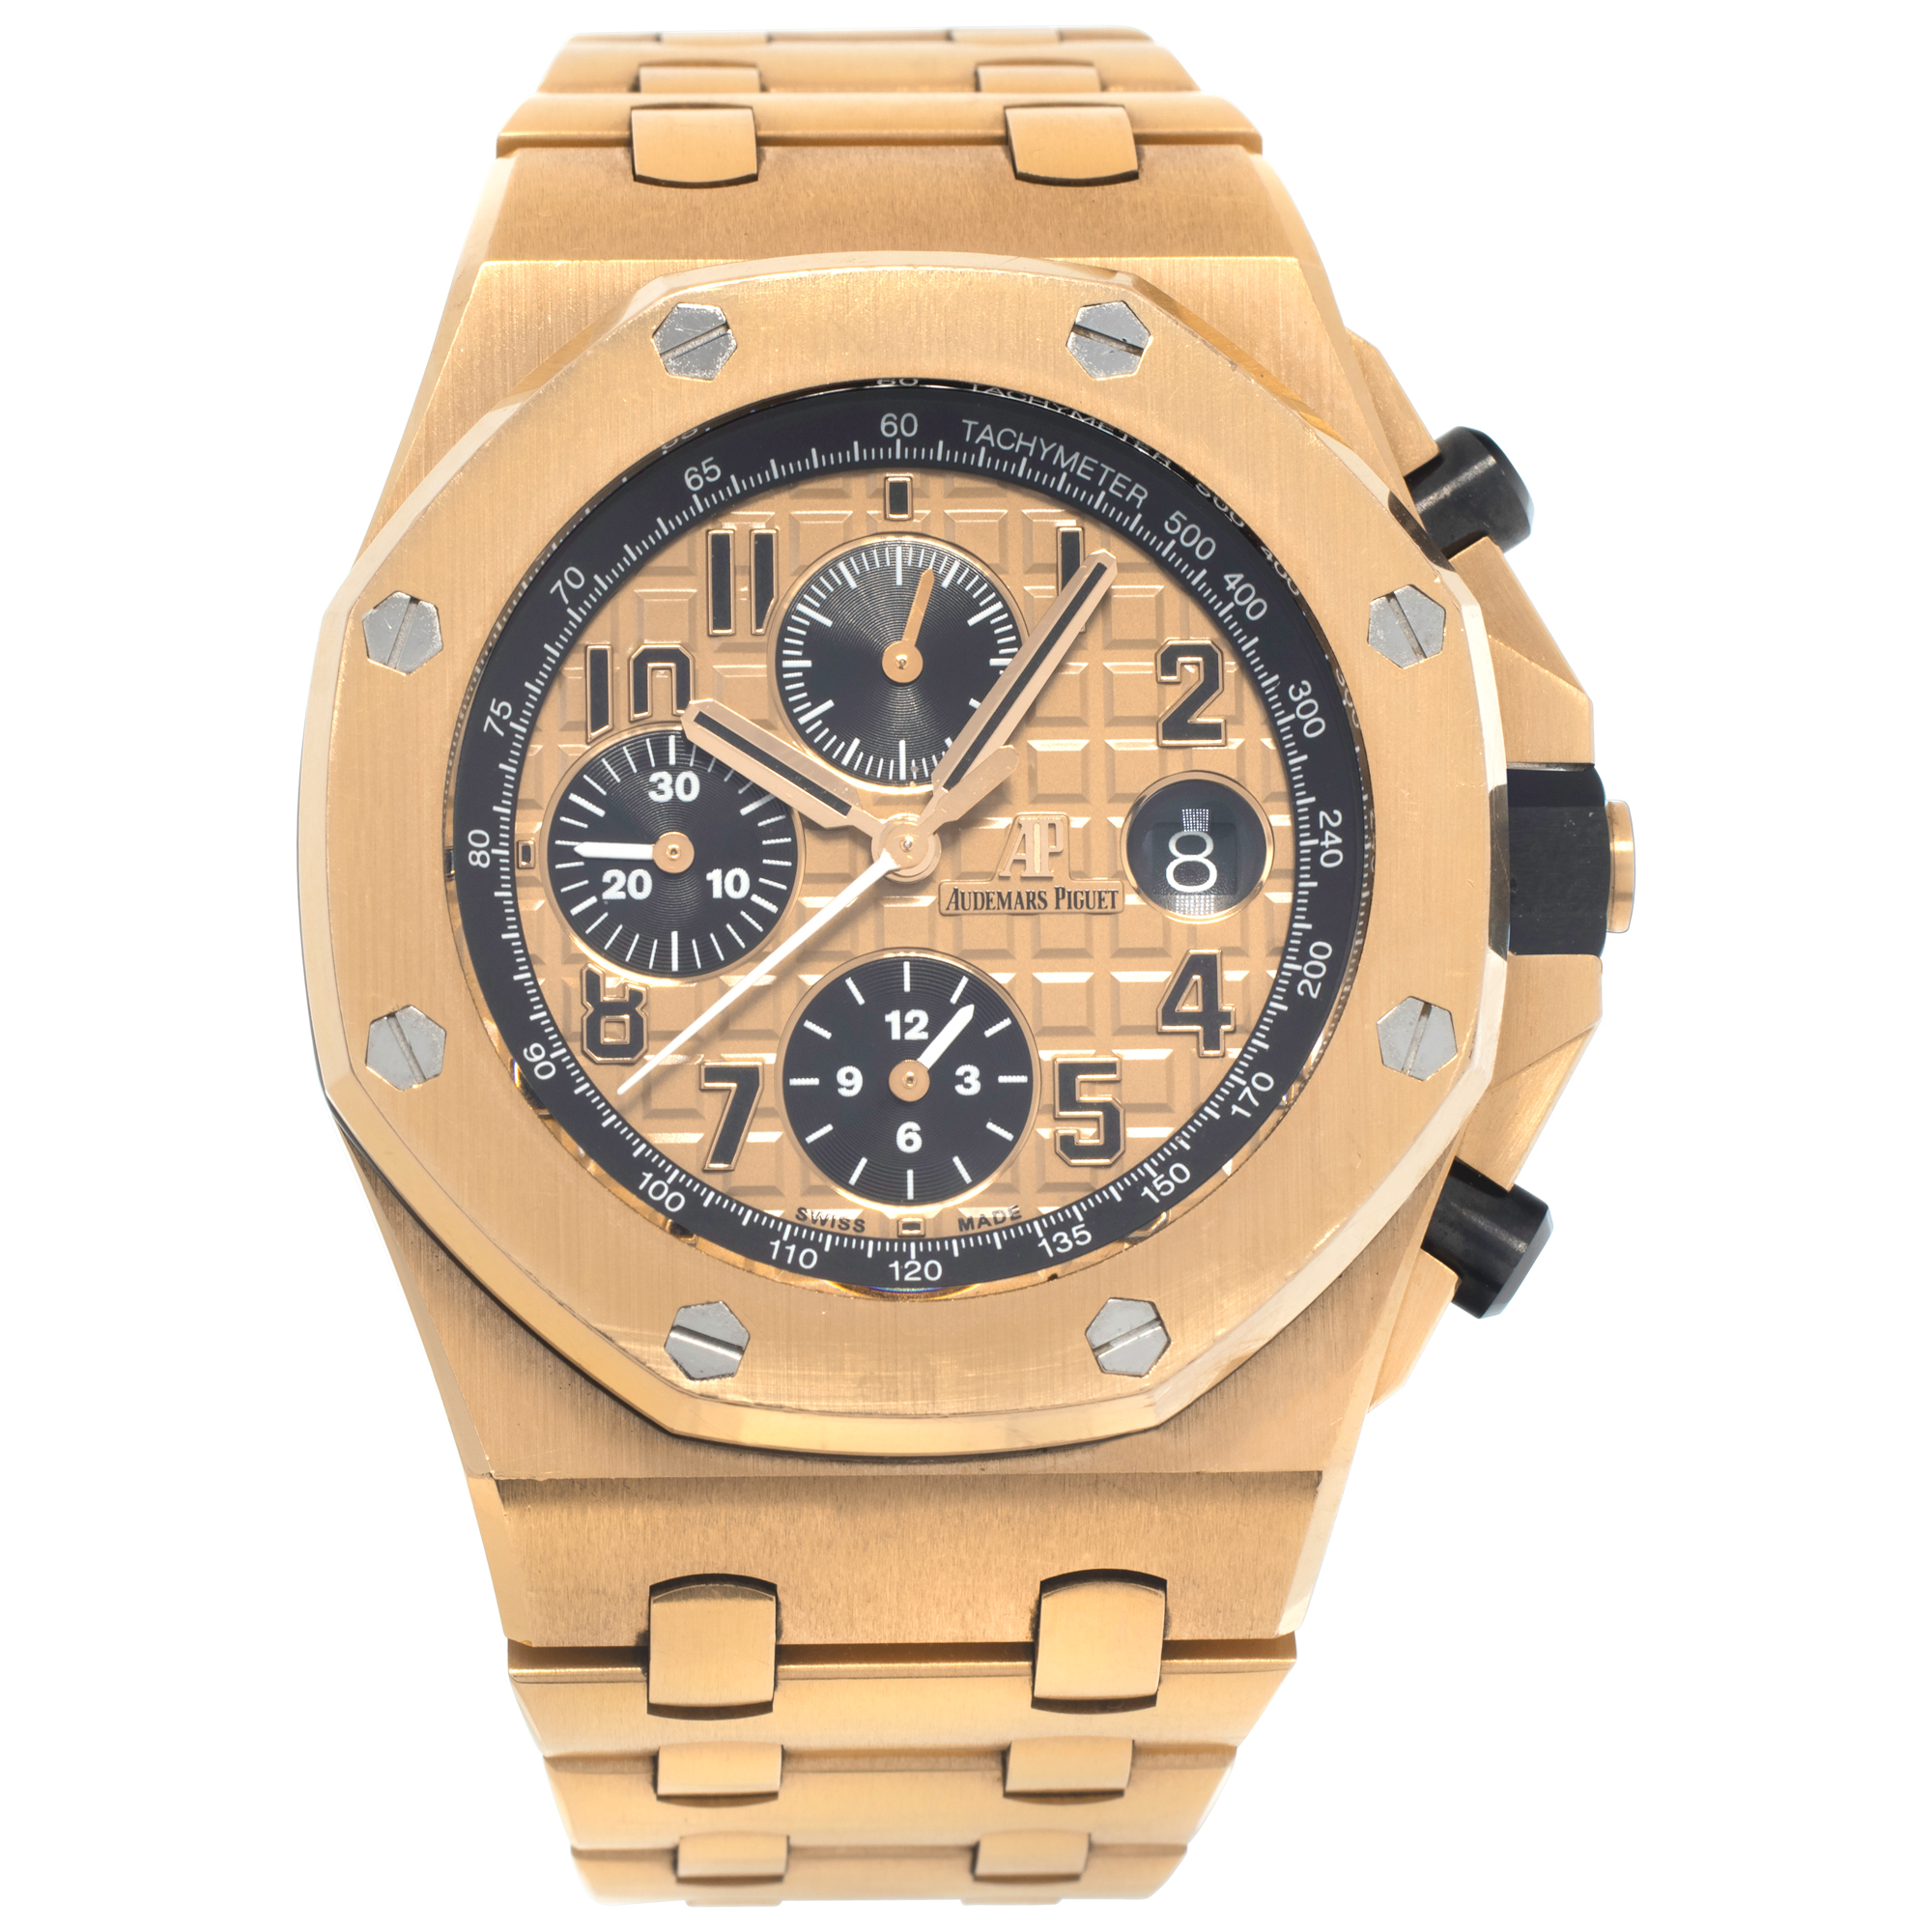 Audemars Piguet Royal Oak Offshore Panda "Pounder or Brick" 42mm 26470OR.OO.1000OR.01 (Watches)